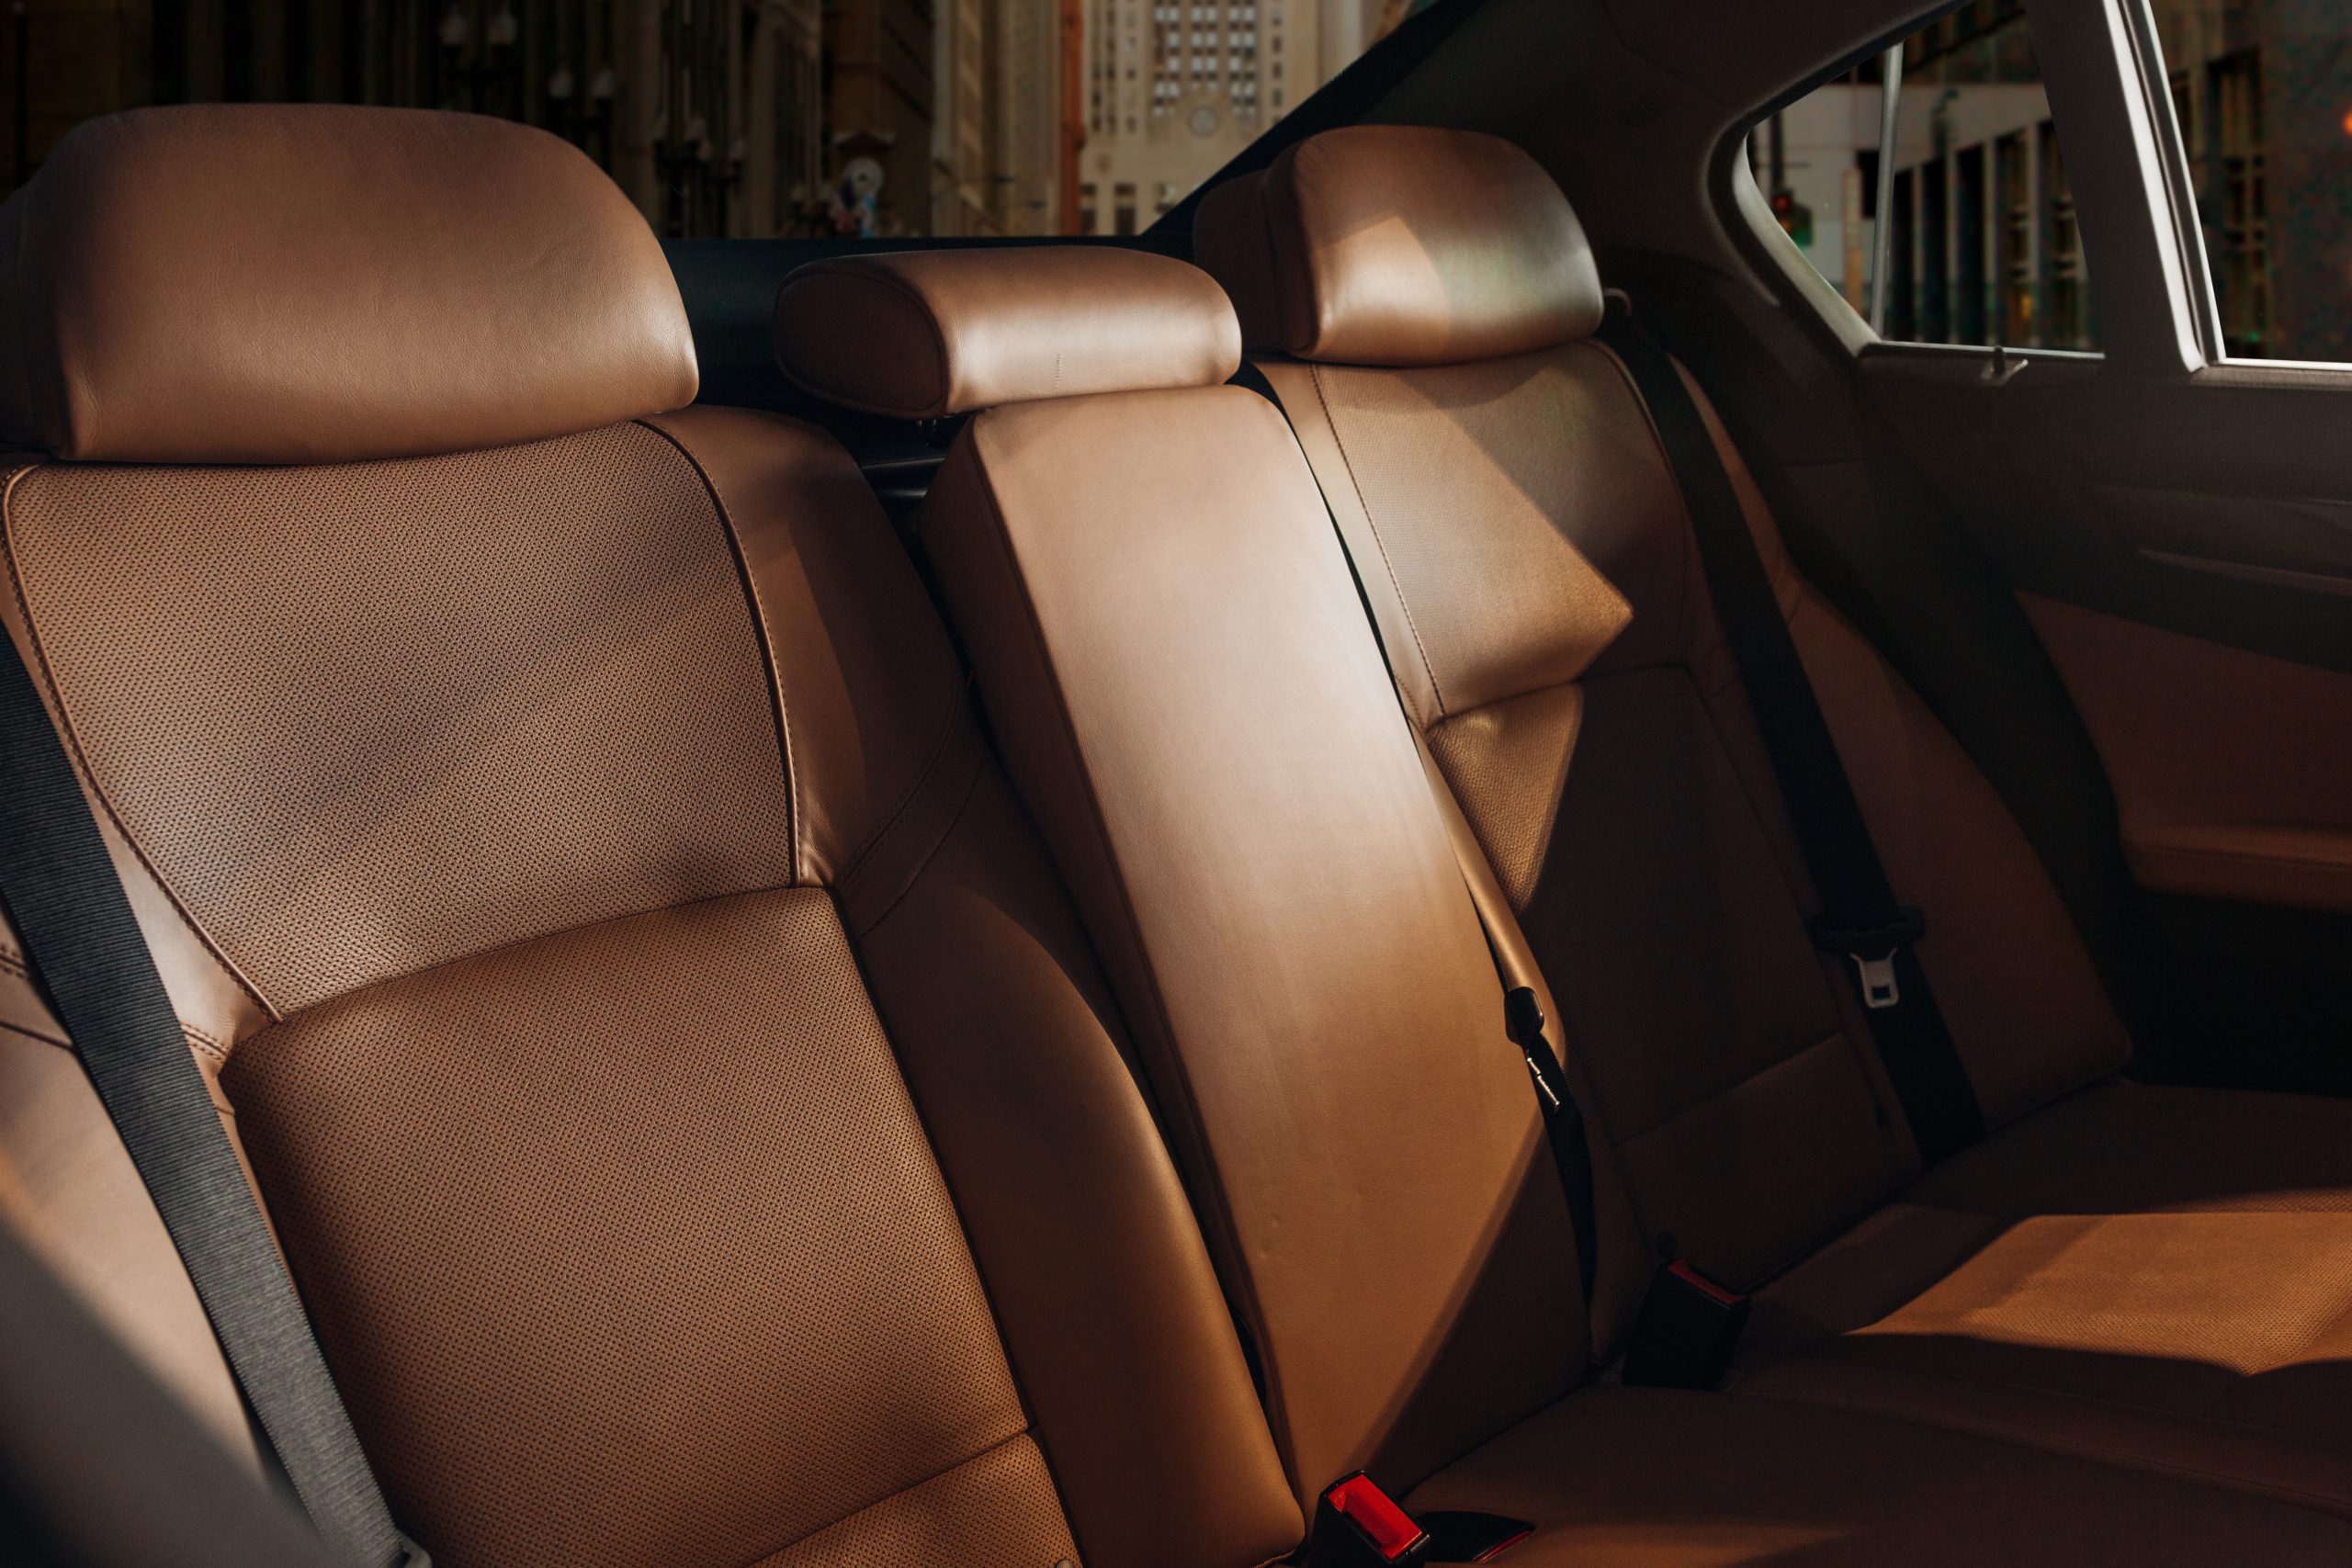 Cozy leather seats at the back row of a modern luxury sedan. Vip